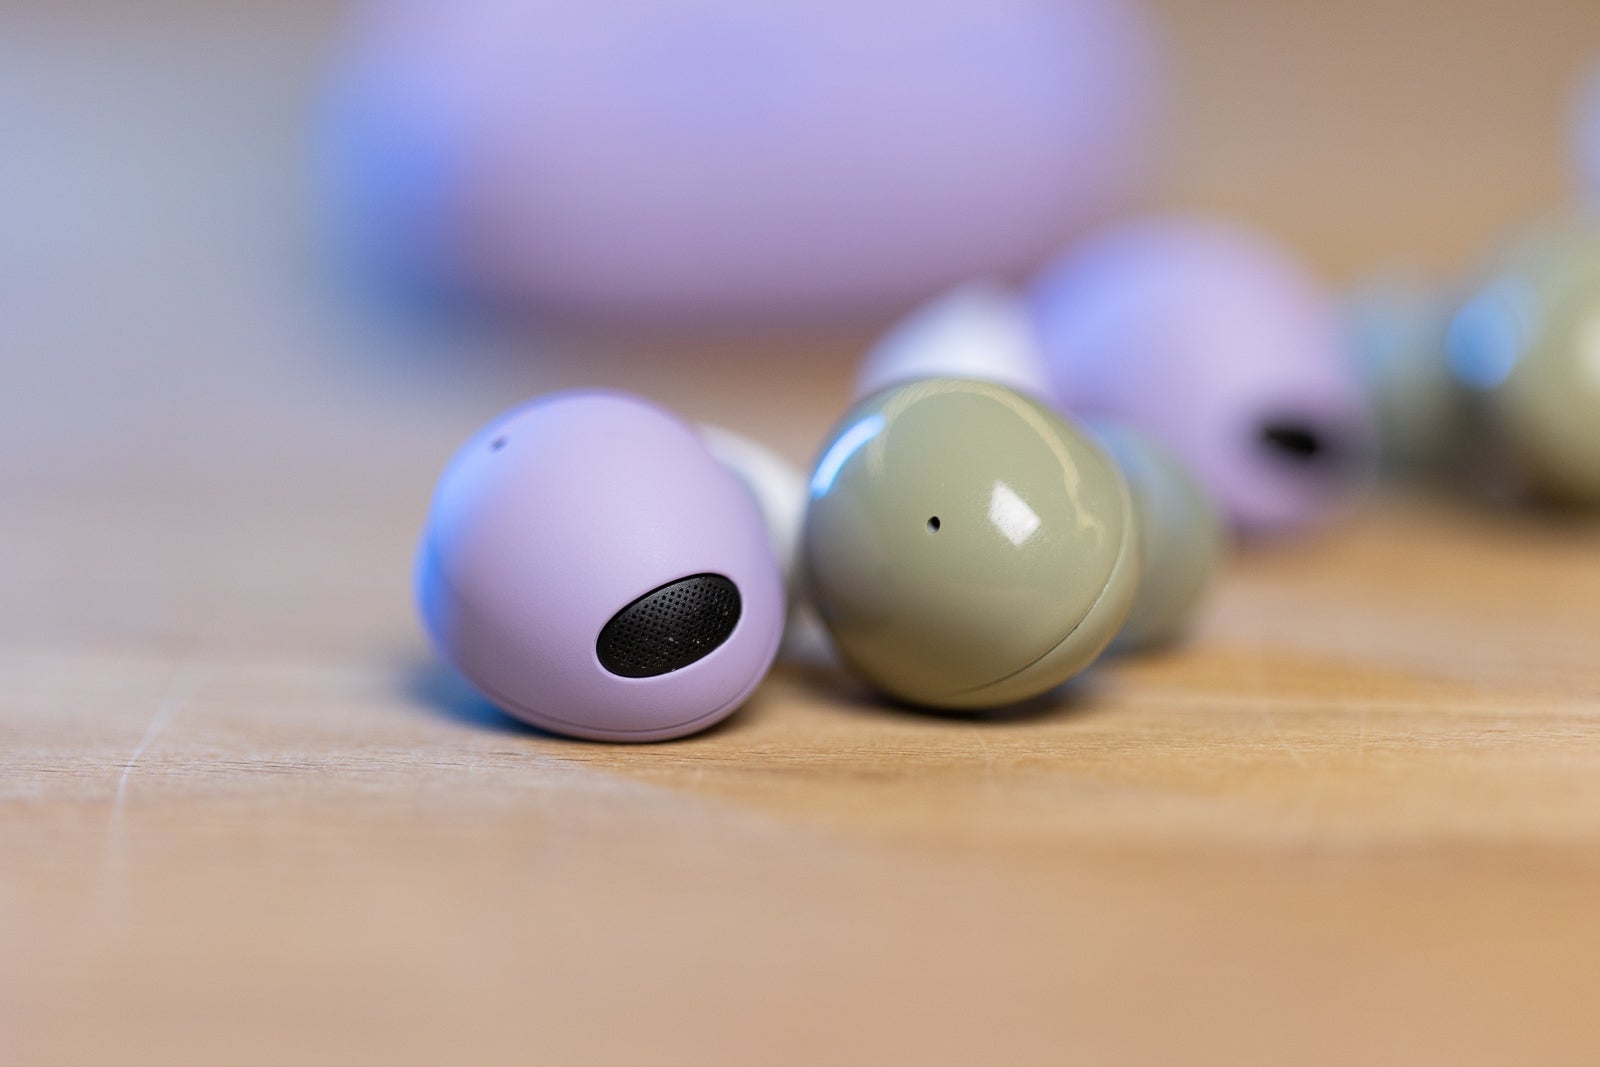 (Image credit - PhoneArena) Galaxy Buds 2 Pro earphone (left) and Galaxy Buds 2 (right) - Galaxy Buds 2 Pro vs Galaxy Buds 2: Can you hear the difference?  Or even see it?